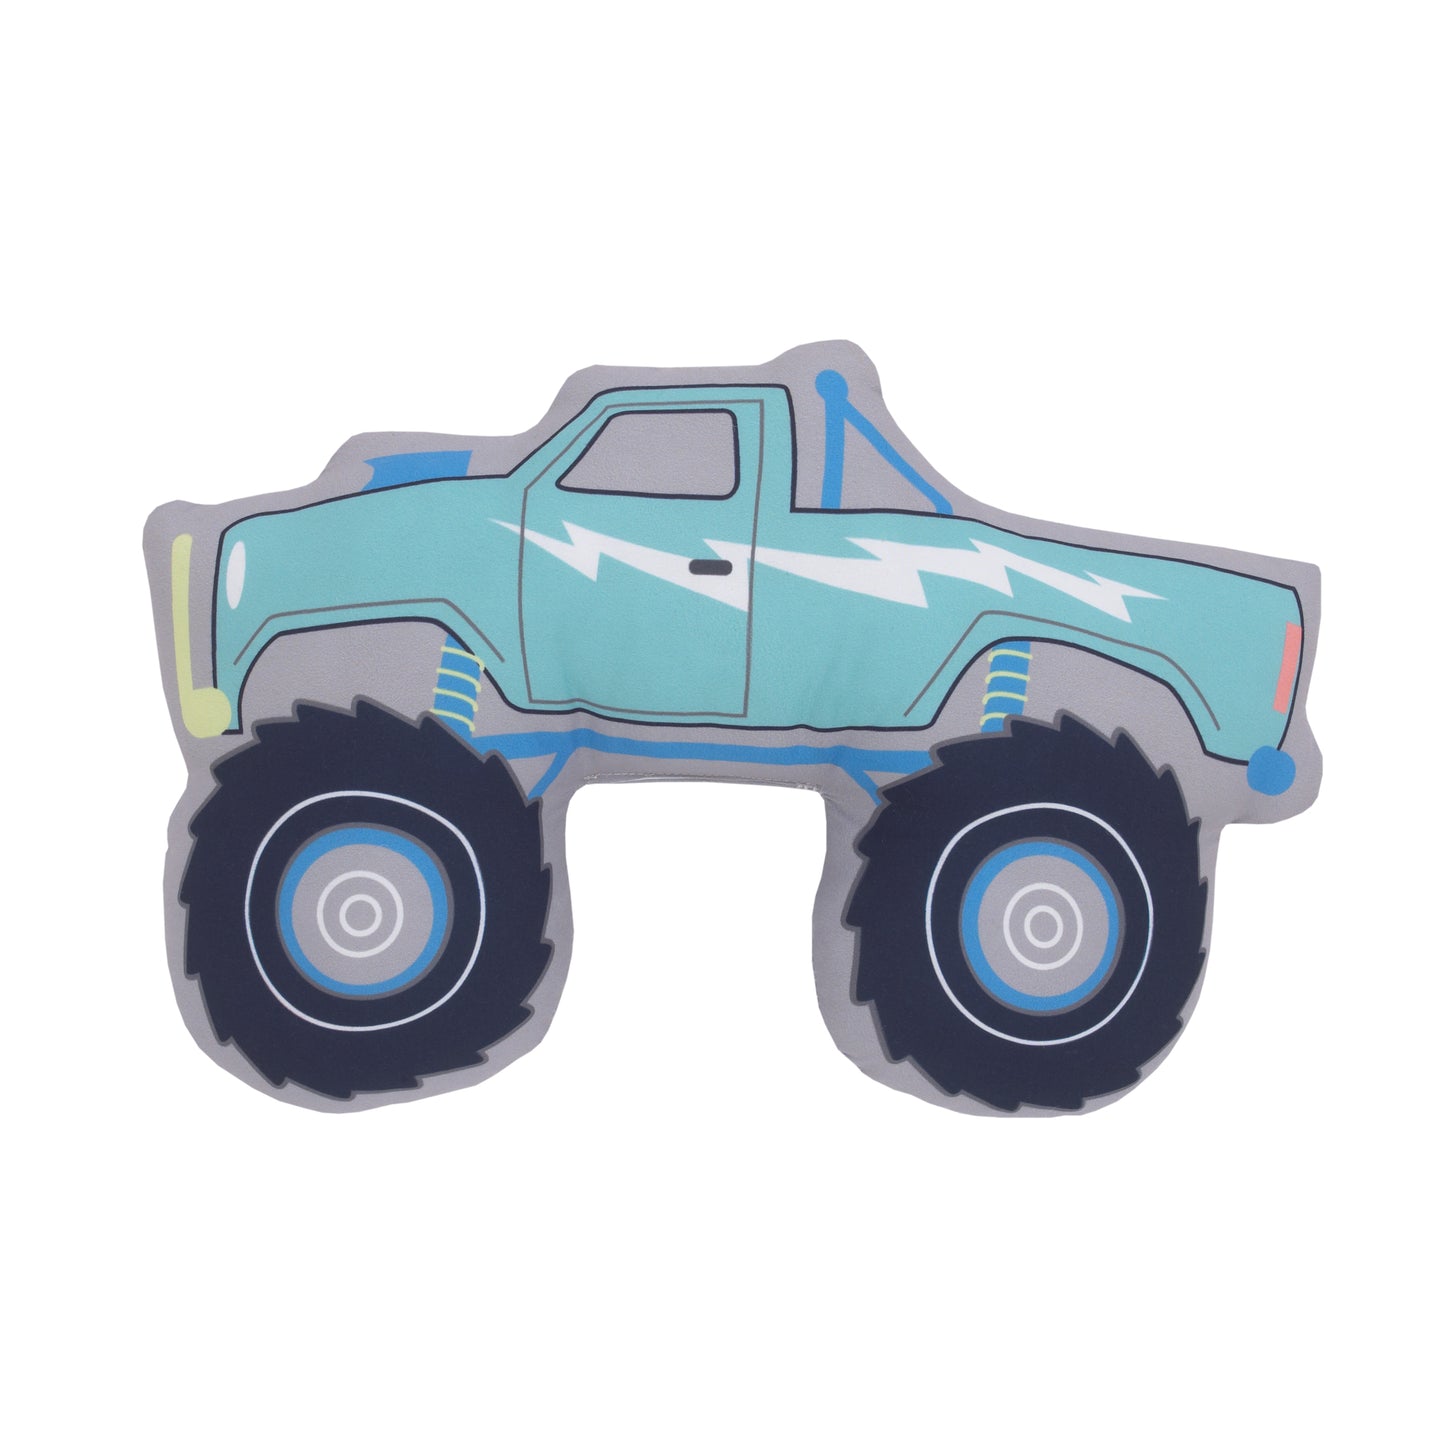 Carter's Teal, Blue and Grey Monster Truck Shaped Toddler Pillow